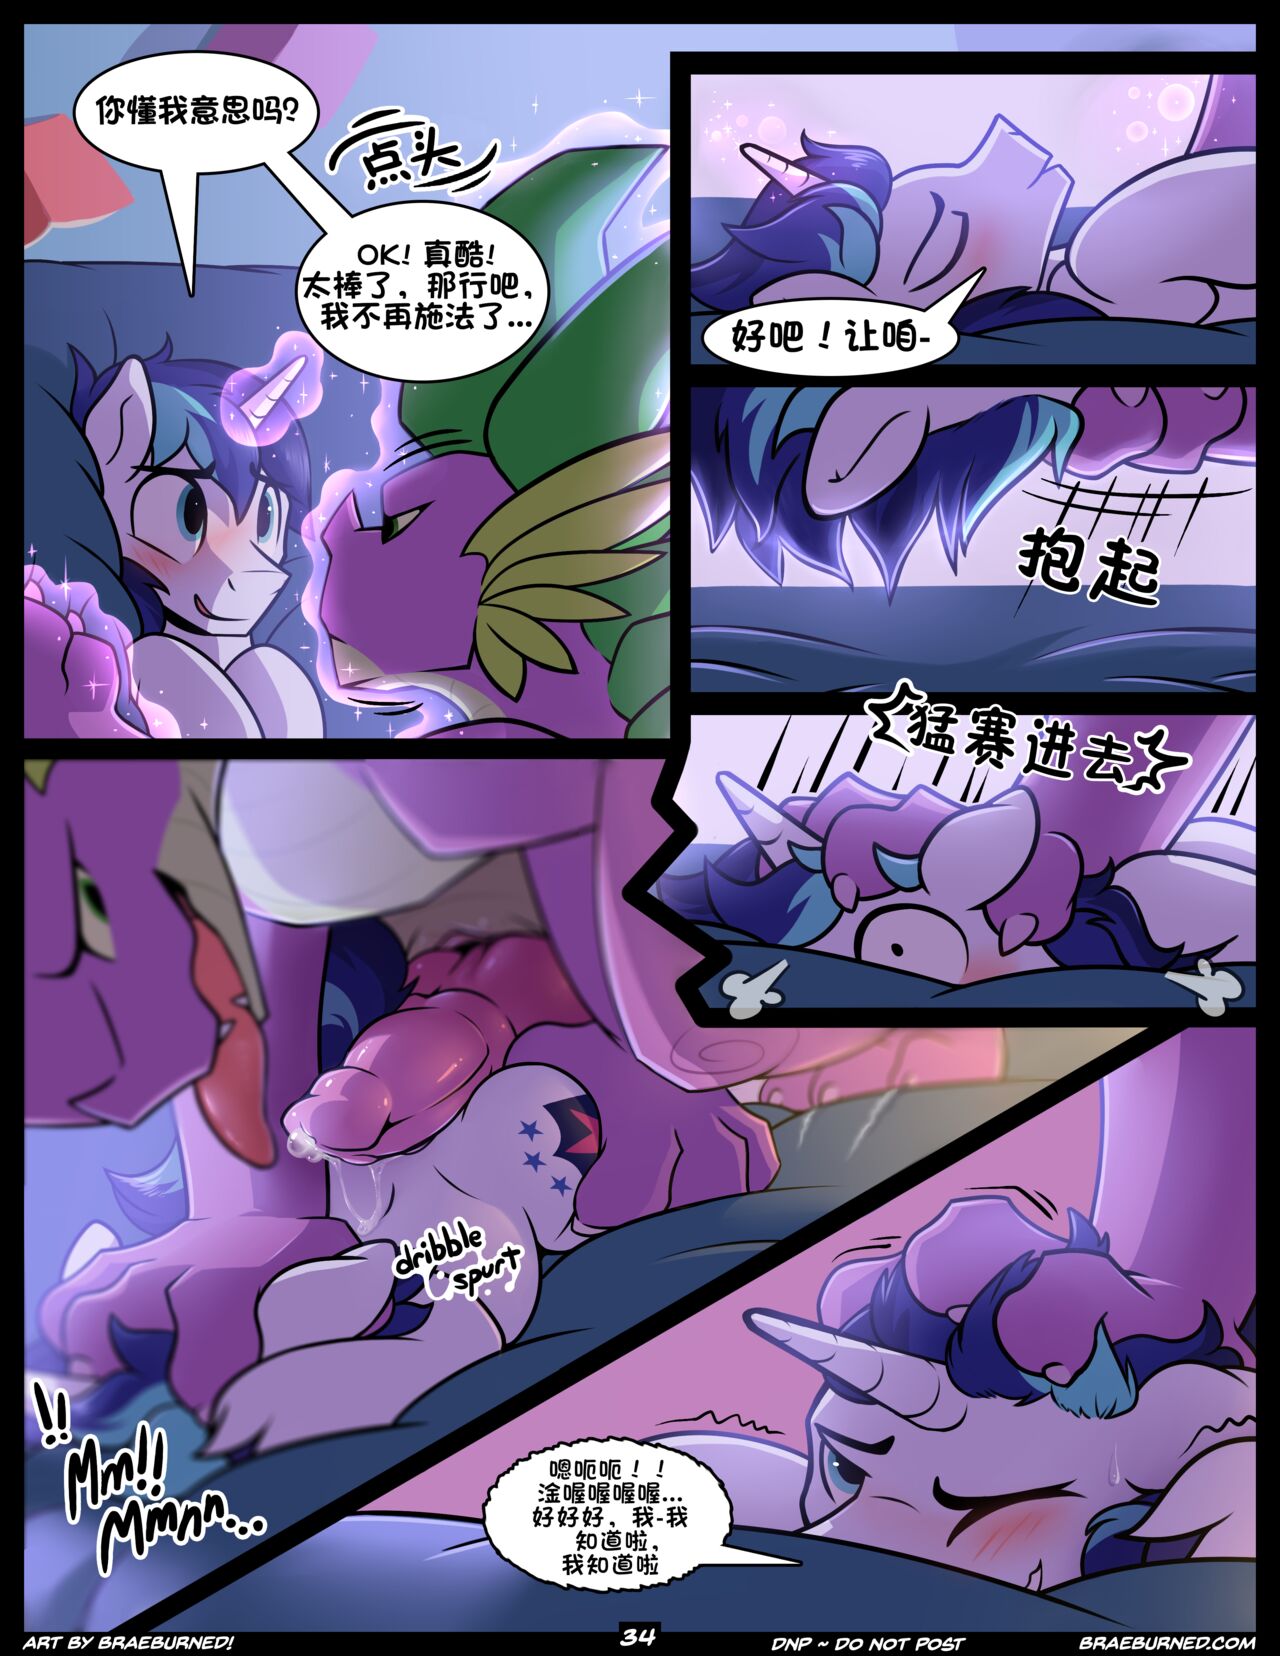 [Braeburned] Comic Relief (My Little Pony Friendship Is Magic)[Chinese][On-going][DrrT翻译] 